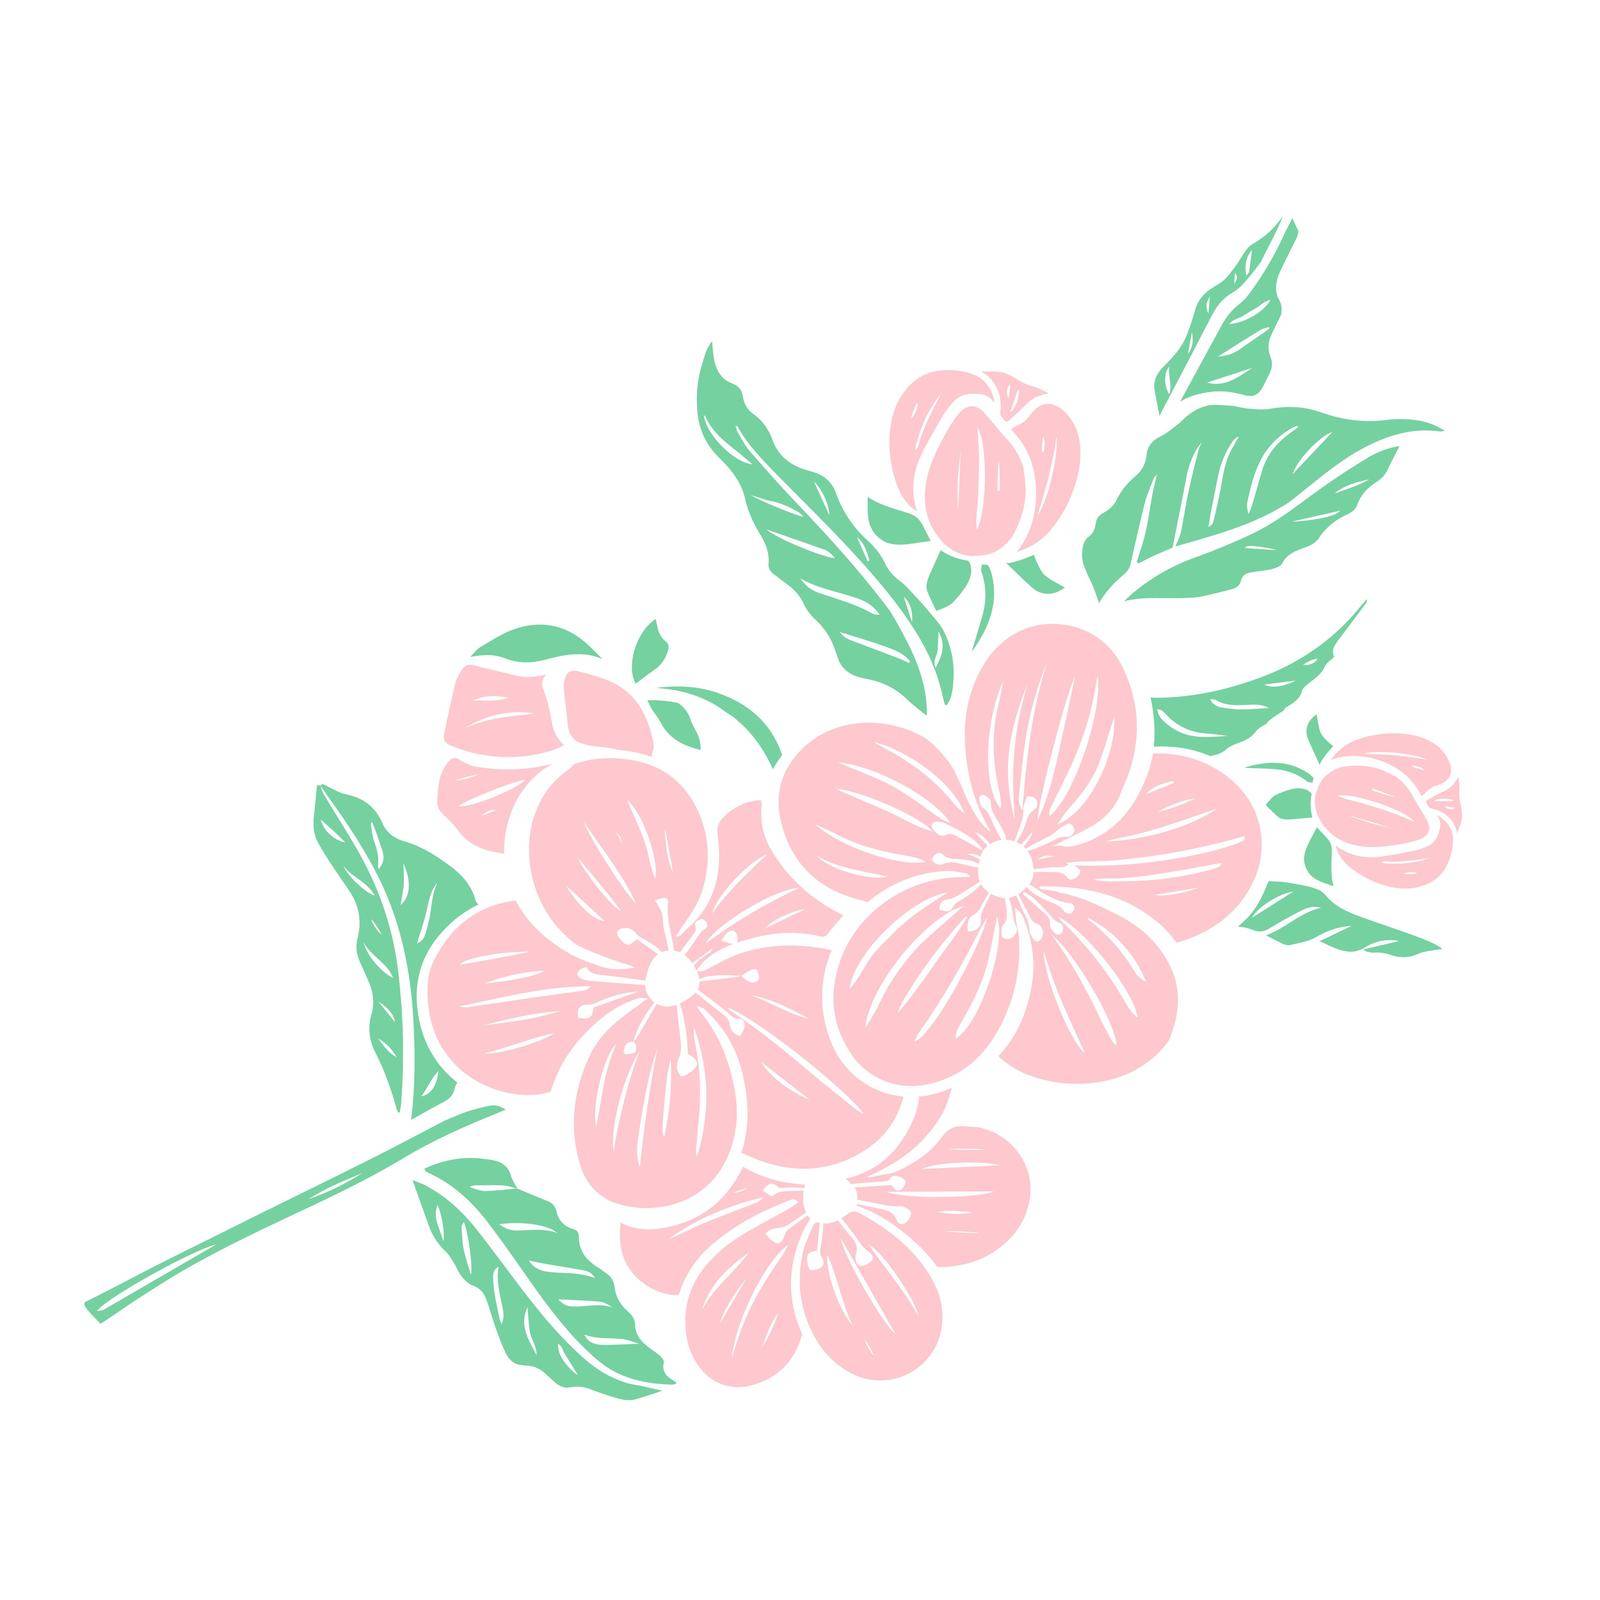 Flowering tree branch isolated object. Twig with delicate pink flowers and leaves. Flowering of apple, sakura, almond, peach and other fruit trees. Vector